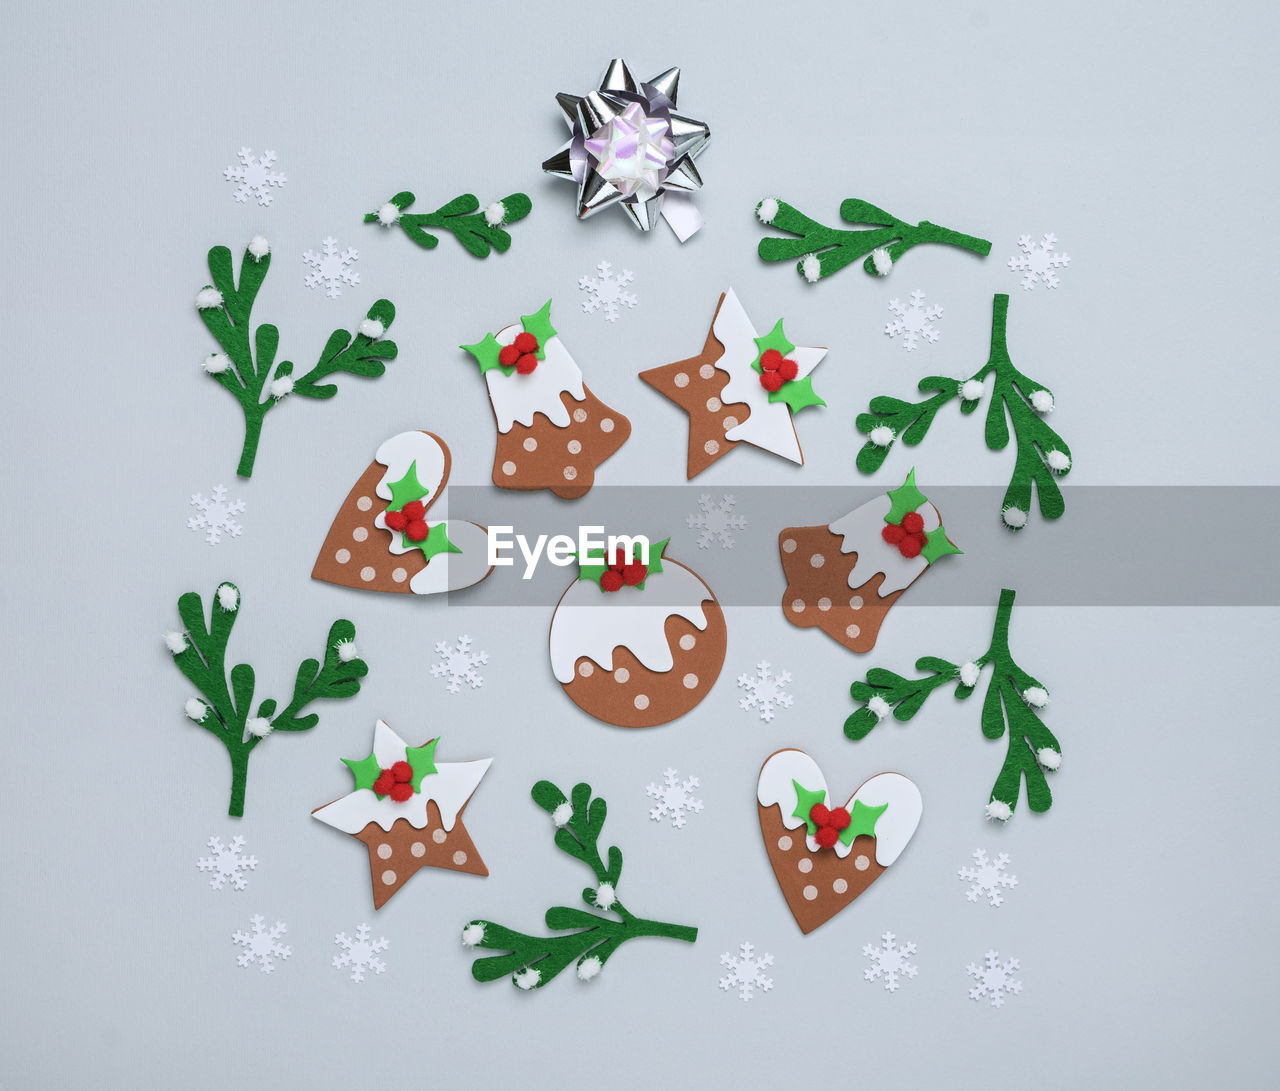 Abstract christmas background with gingerbread stars and bells stickers, mistletoe felt sprigs